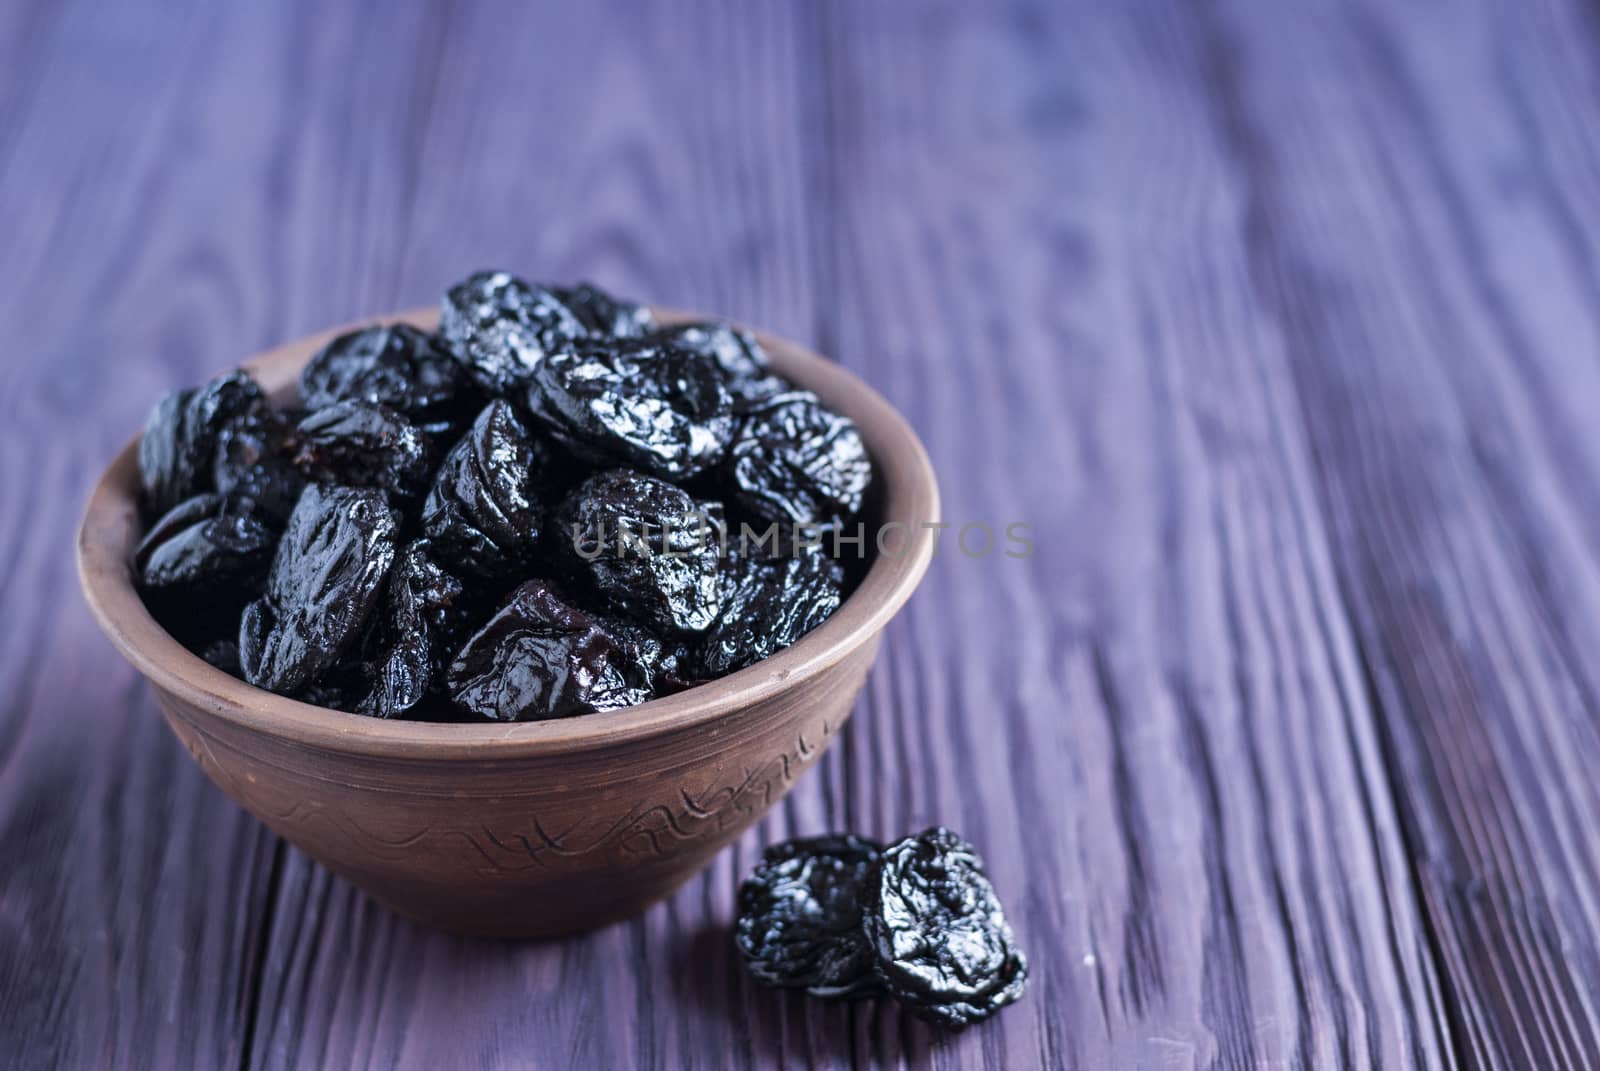 Closeup of clay bowl filled with shiny sweet prunes on wooden table